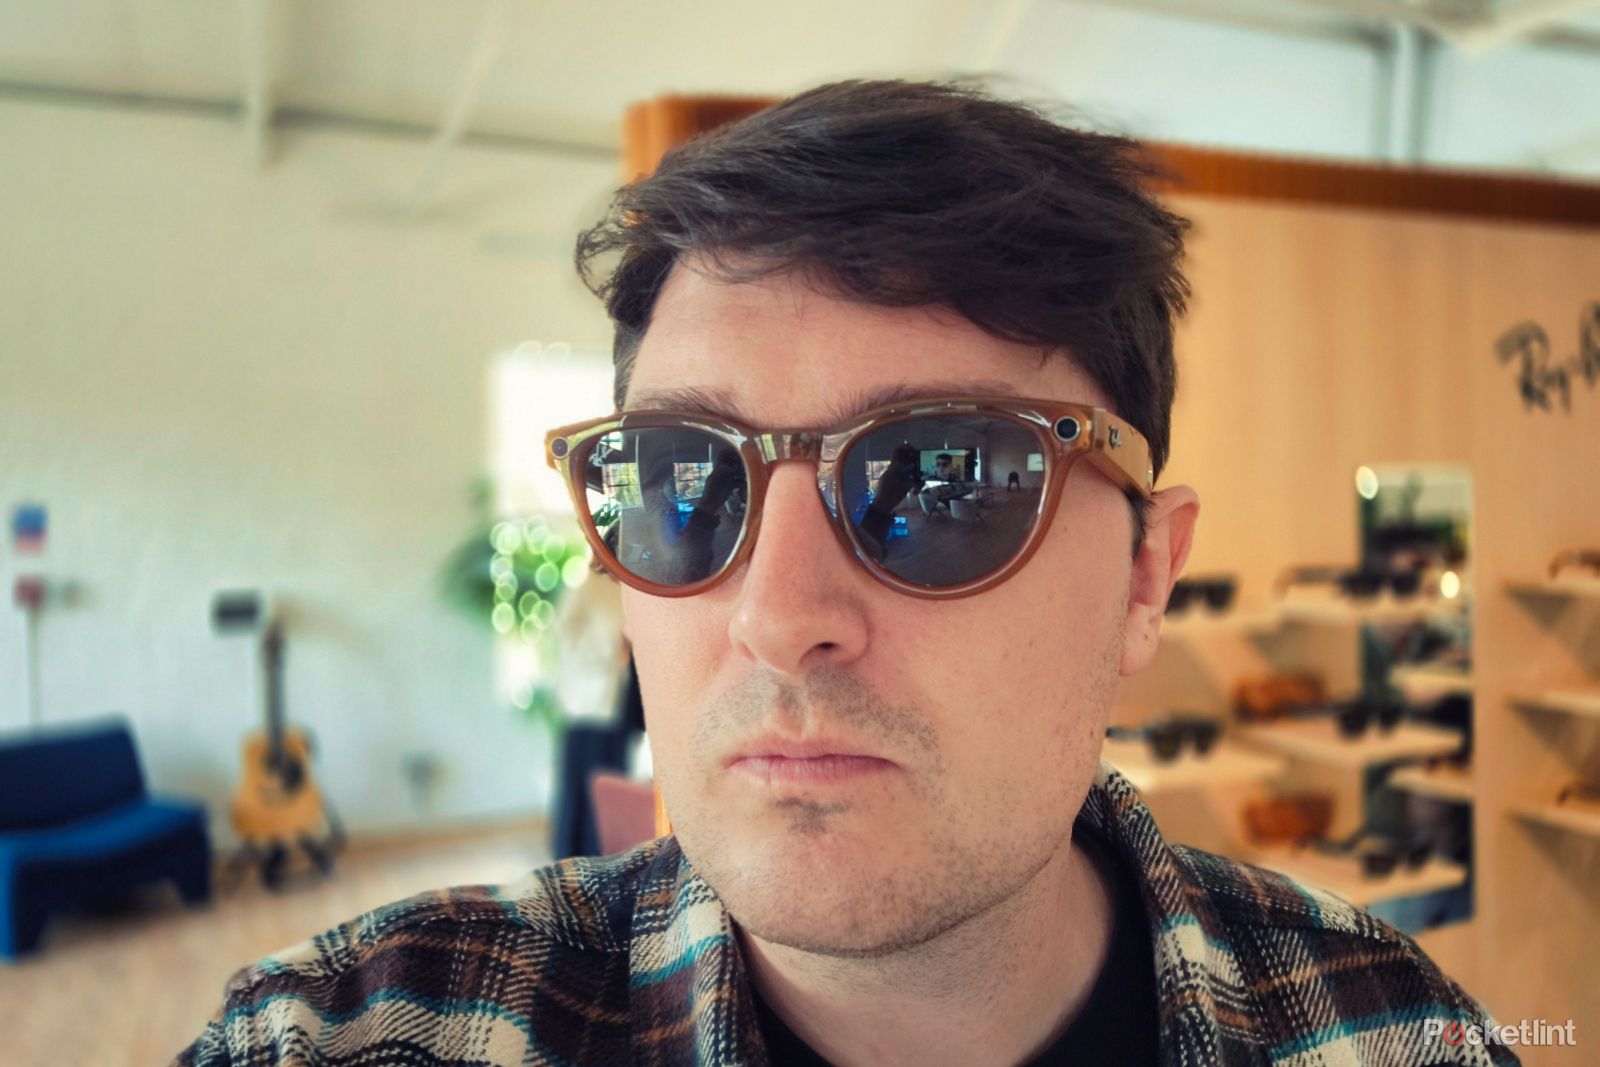 Ray-Ban Meta Smart Glasses hands on: The story continues